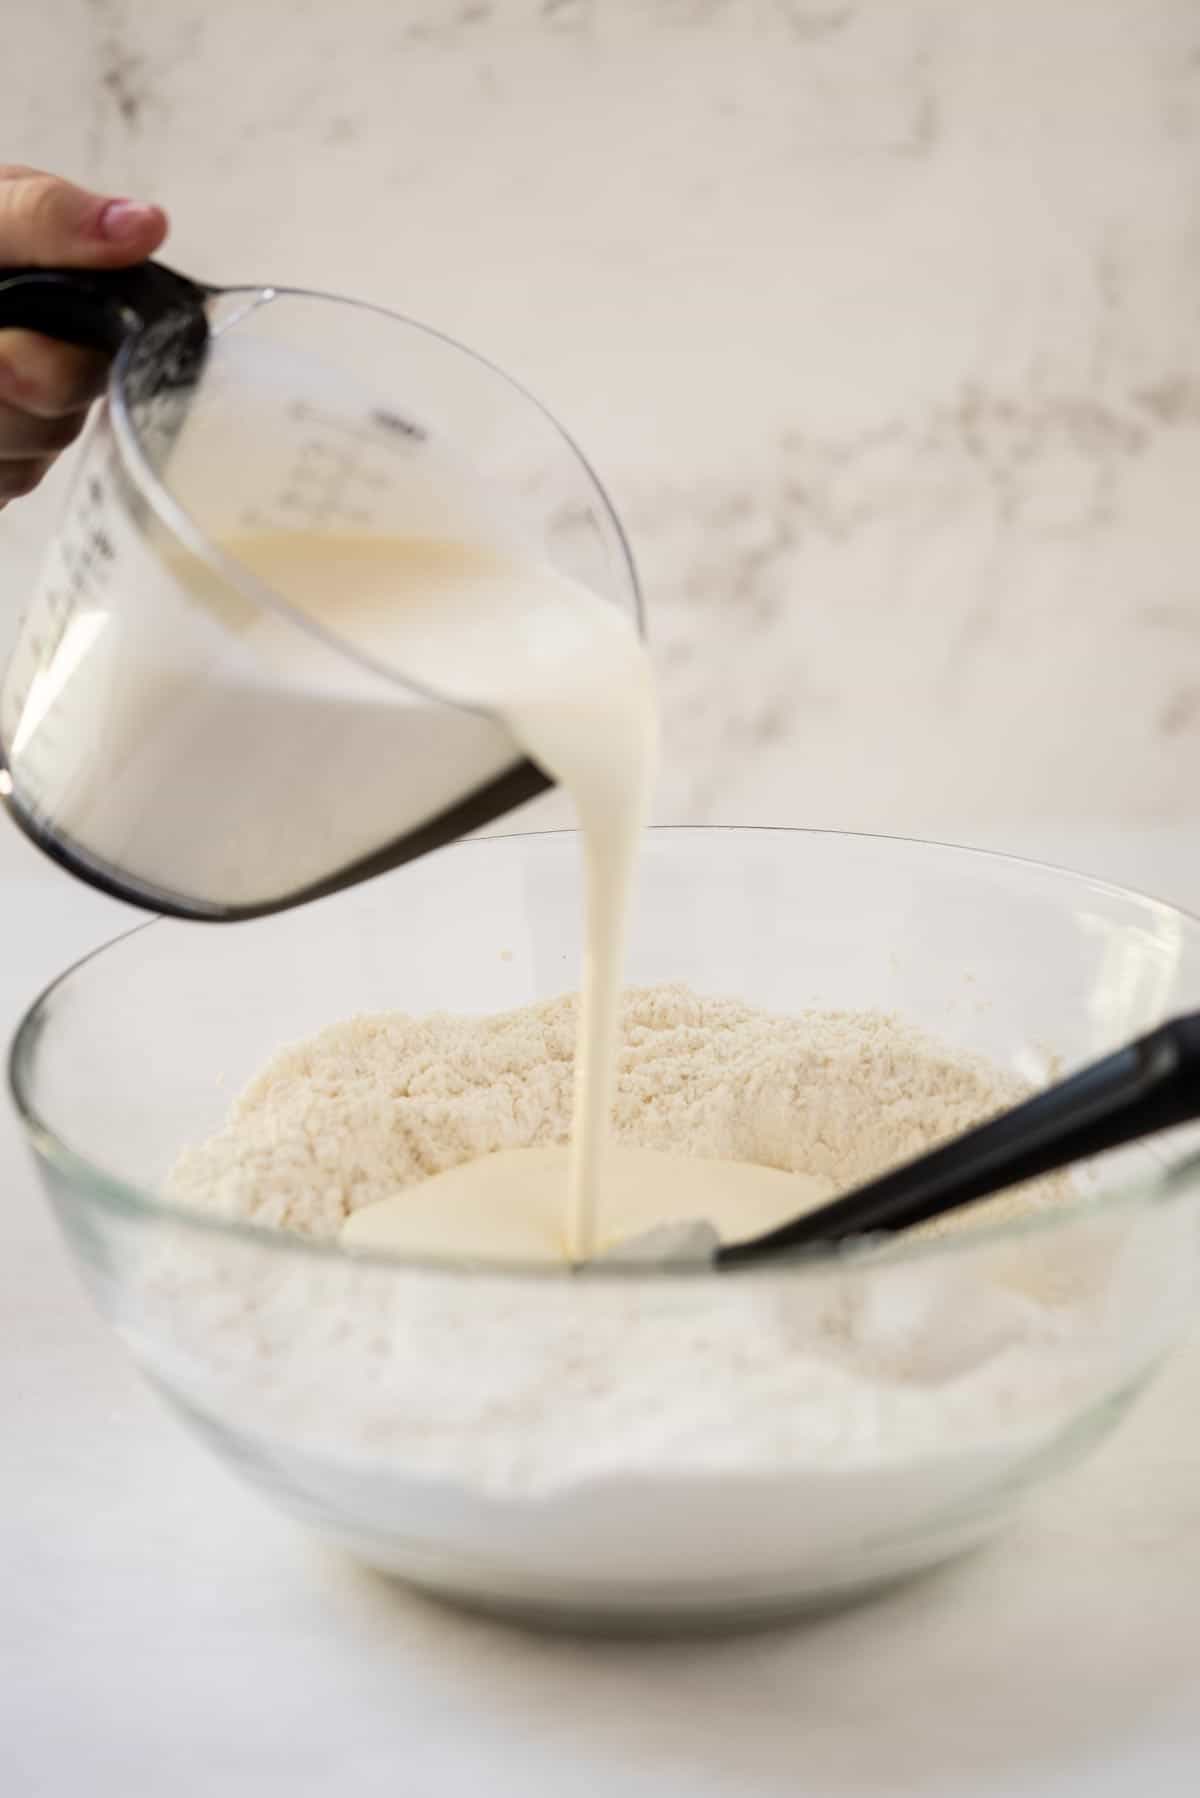 Whipping cream being poured into a bowl with other ingredients